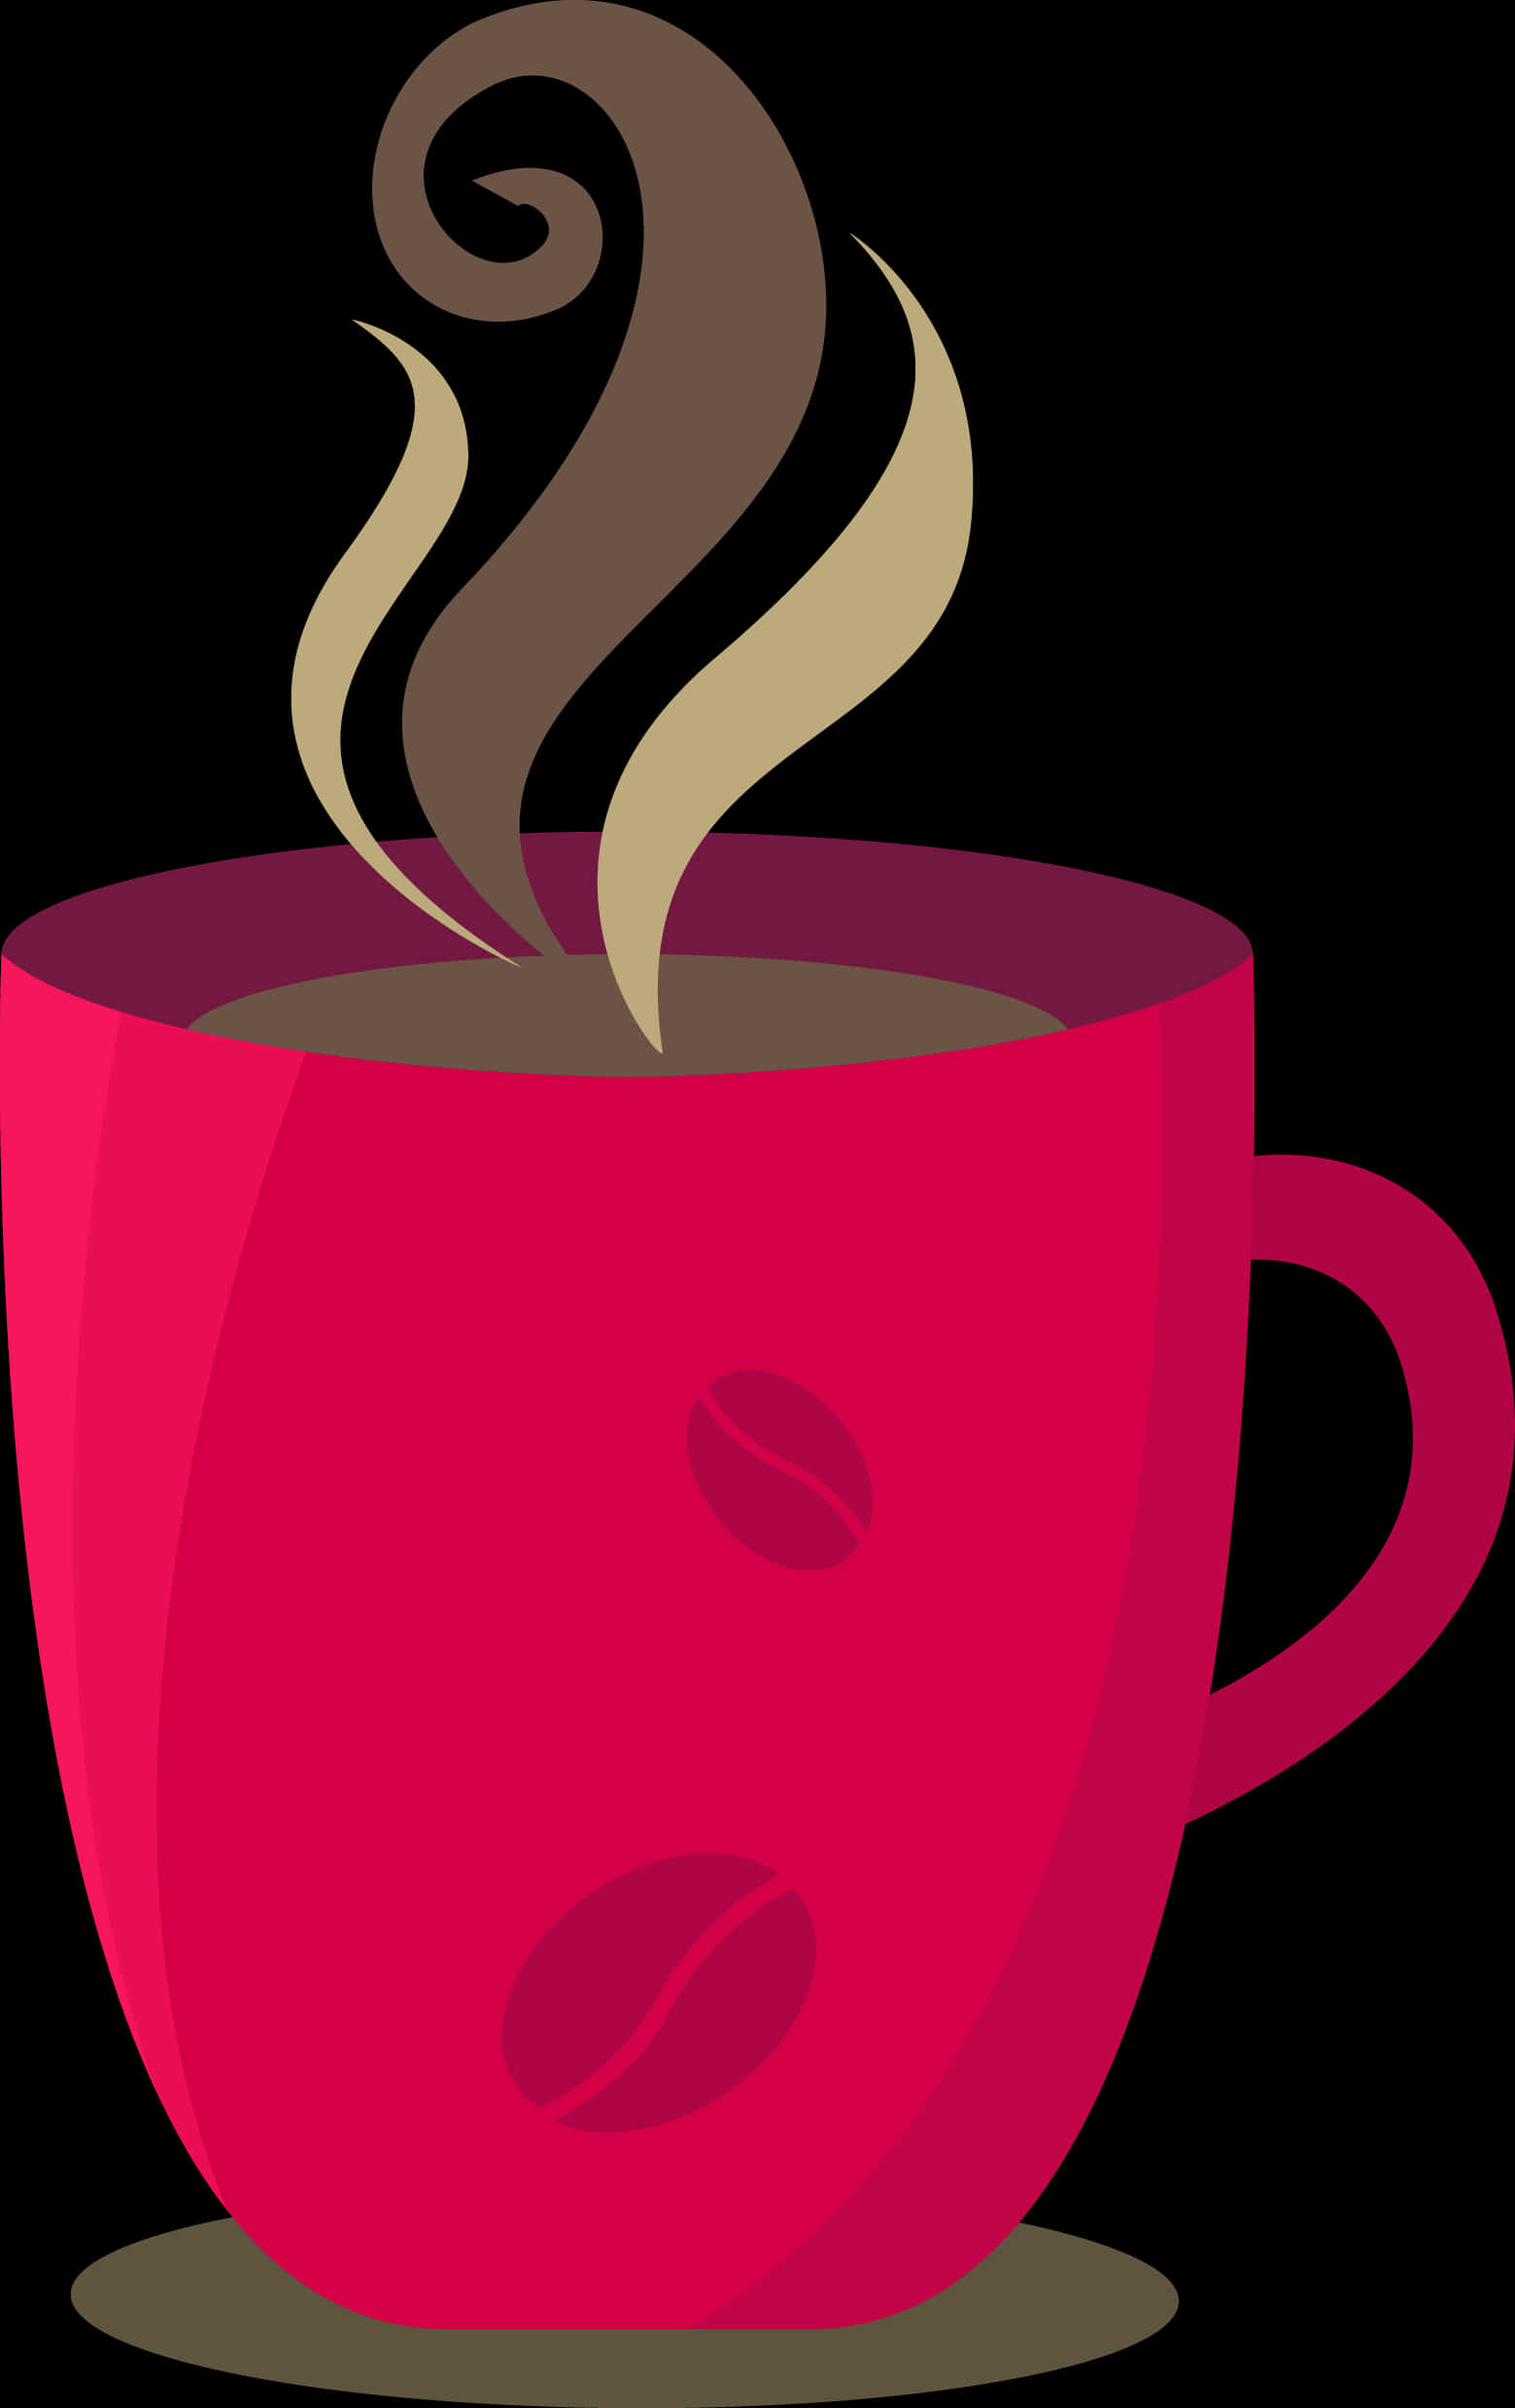 Steaming Coffee Cup Vector PNG image